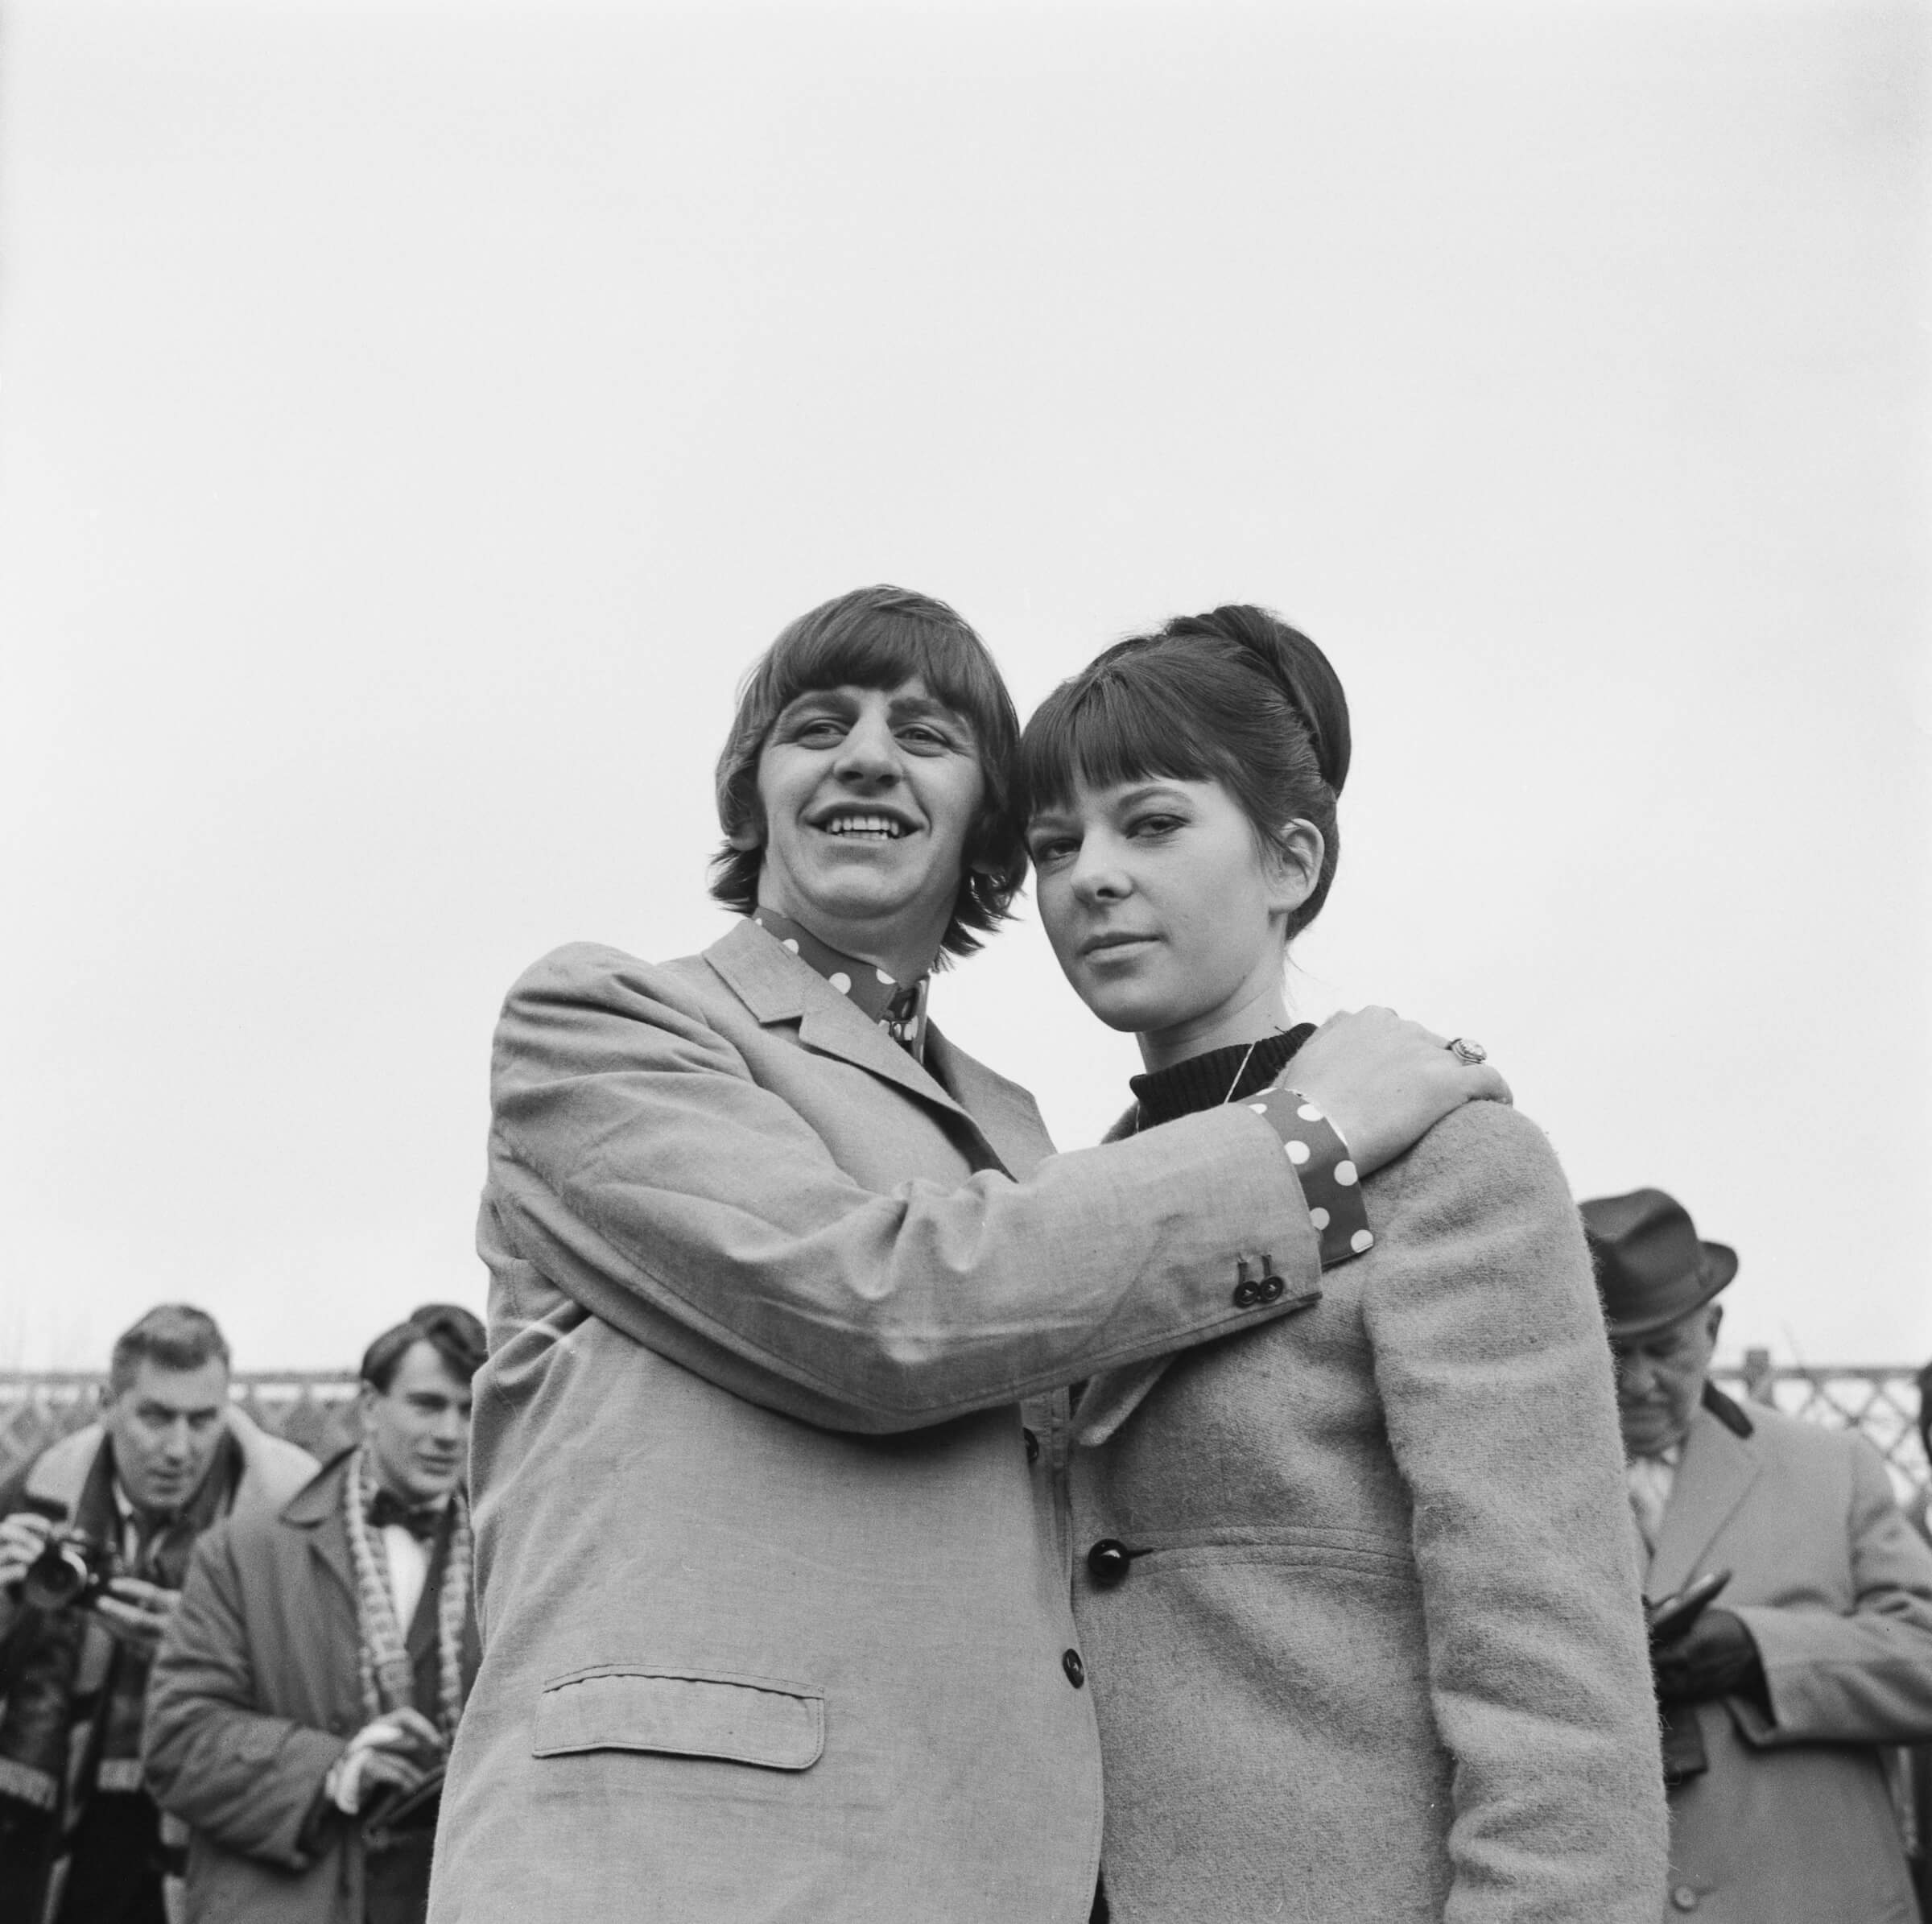 Ringo Starr of the Beatles with his wife Maureen Cox during their honeymoon